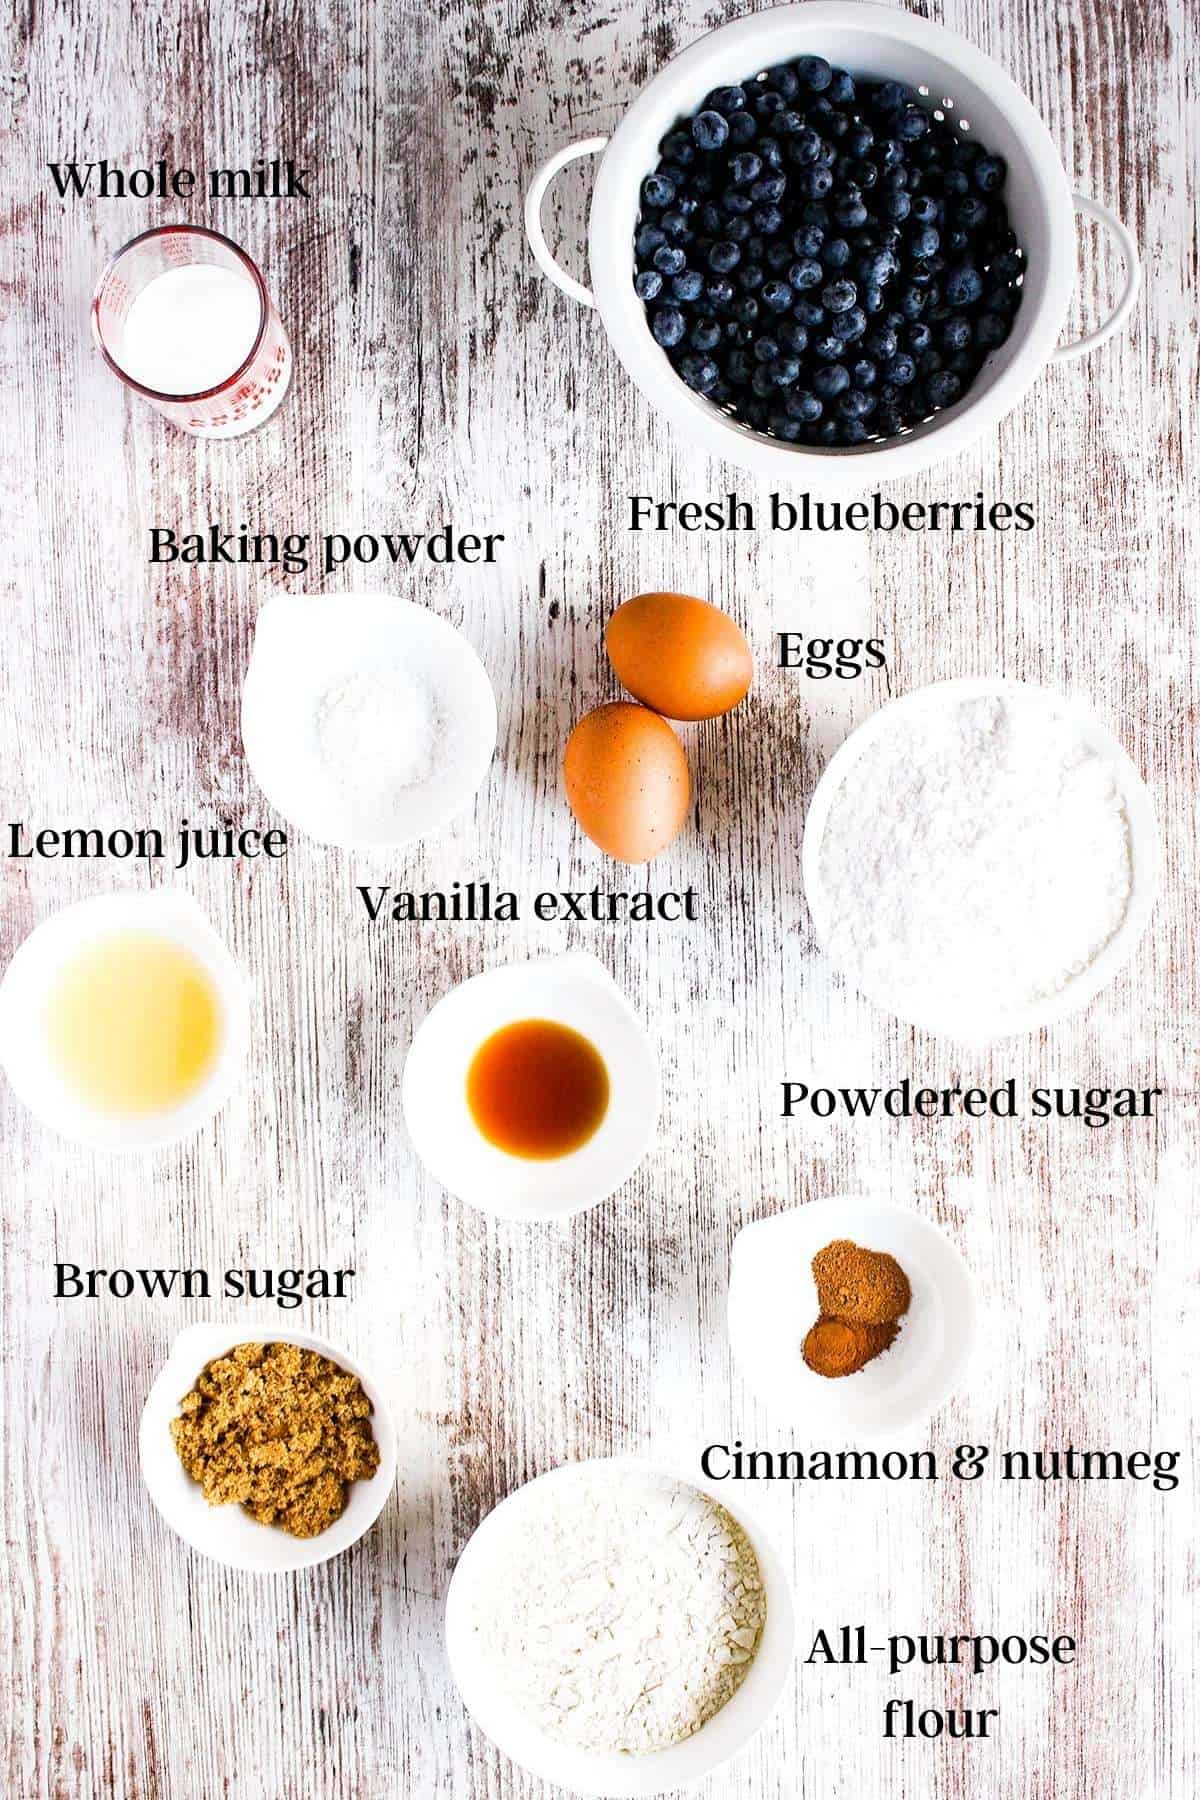 Ingredients for blueberry fritters with vanilla lemon glaze (see recipe card).